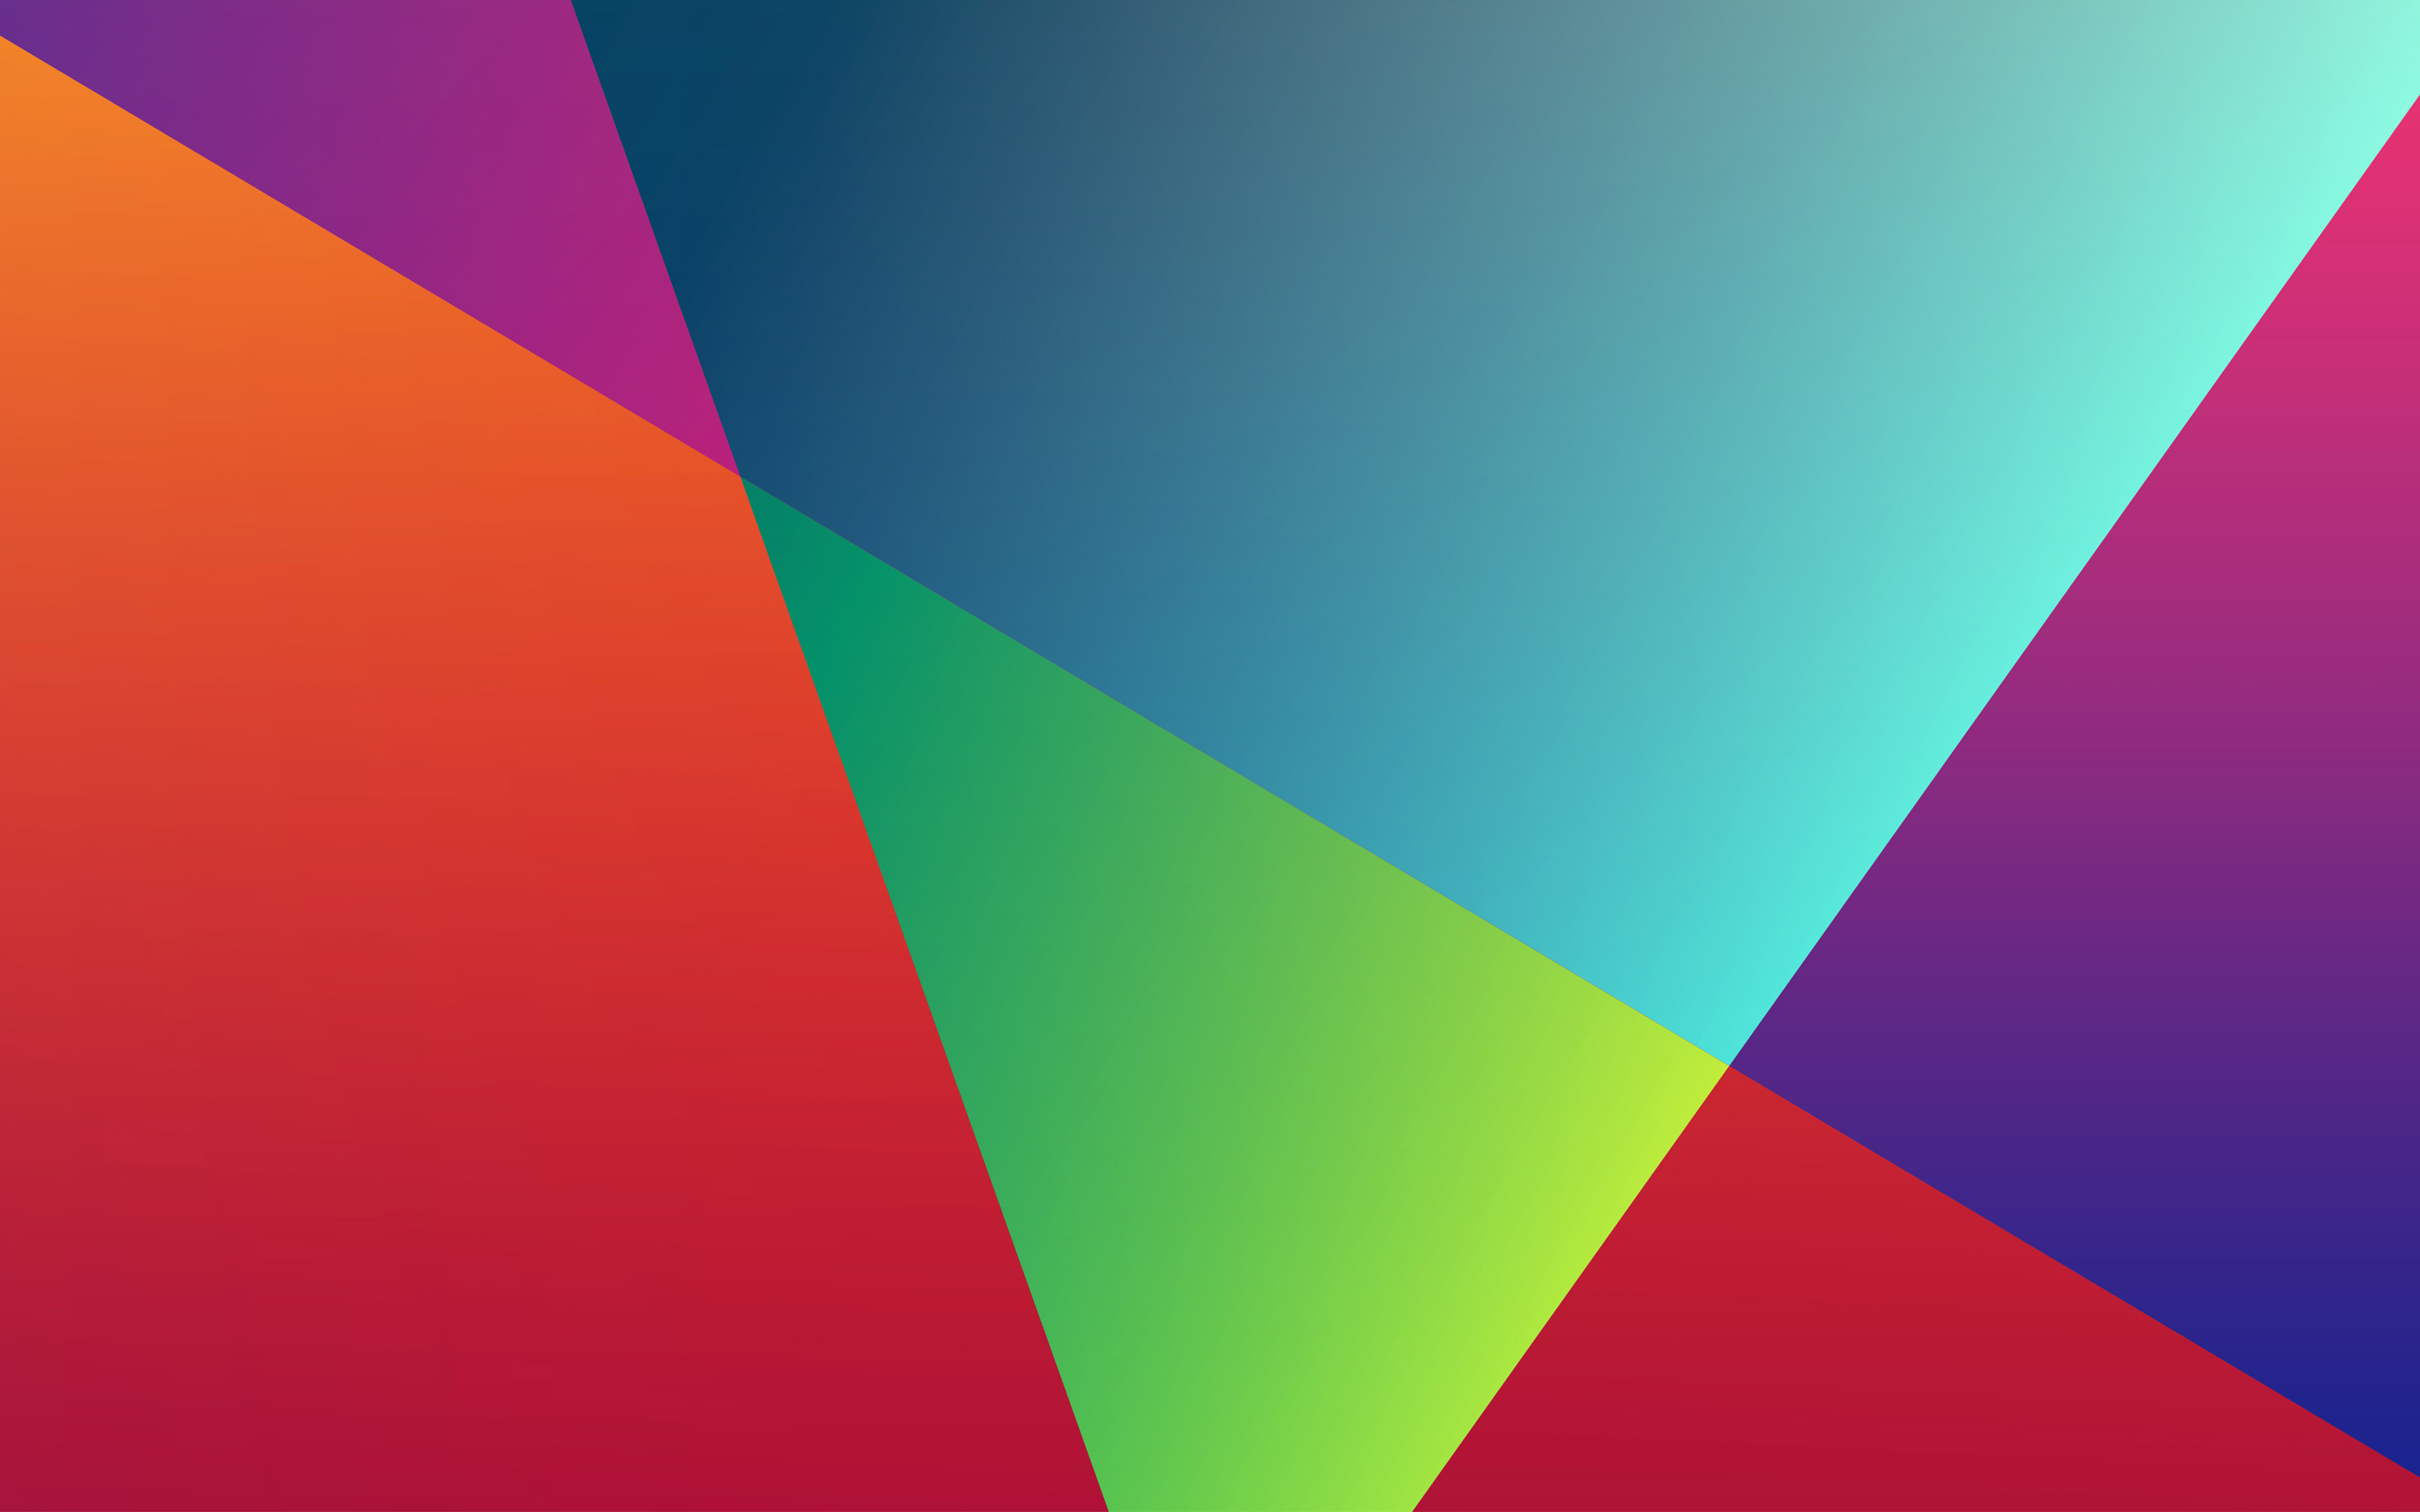 vector wallpaper,blue,colorfulness,green,red,orange